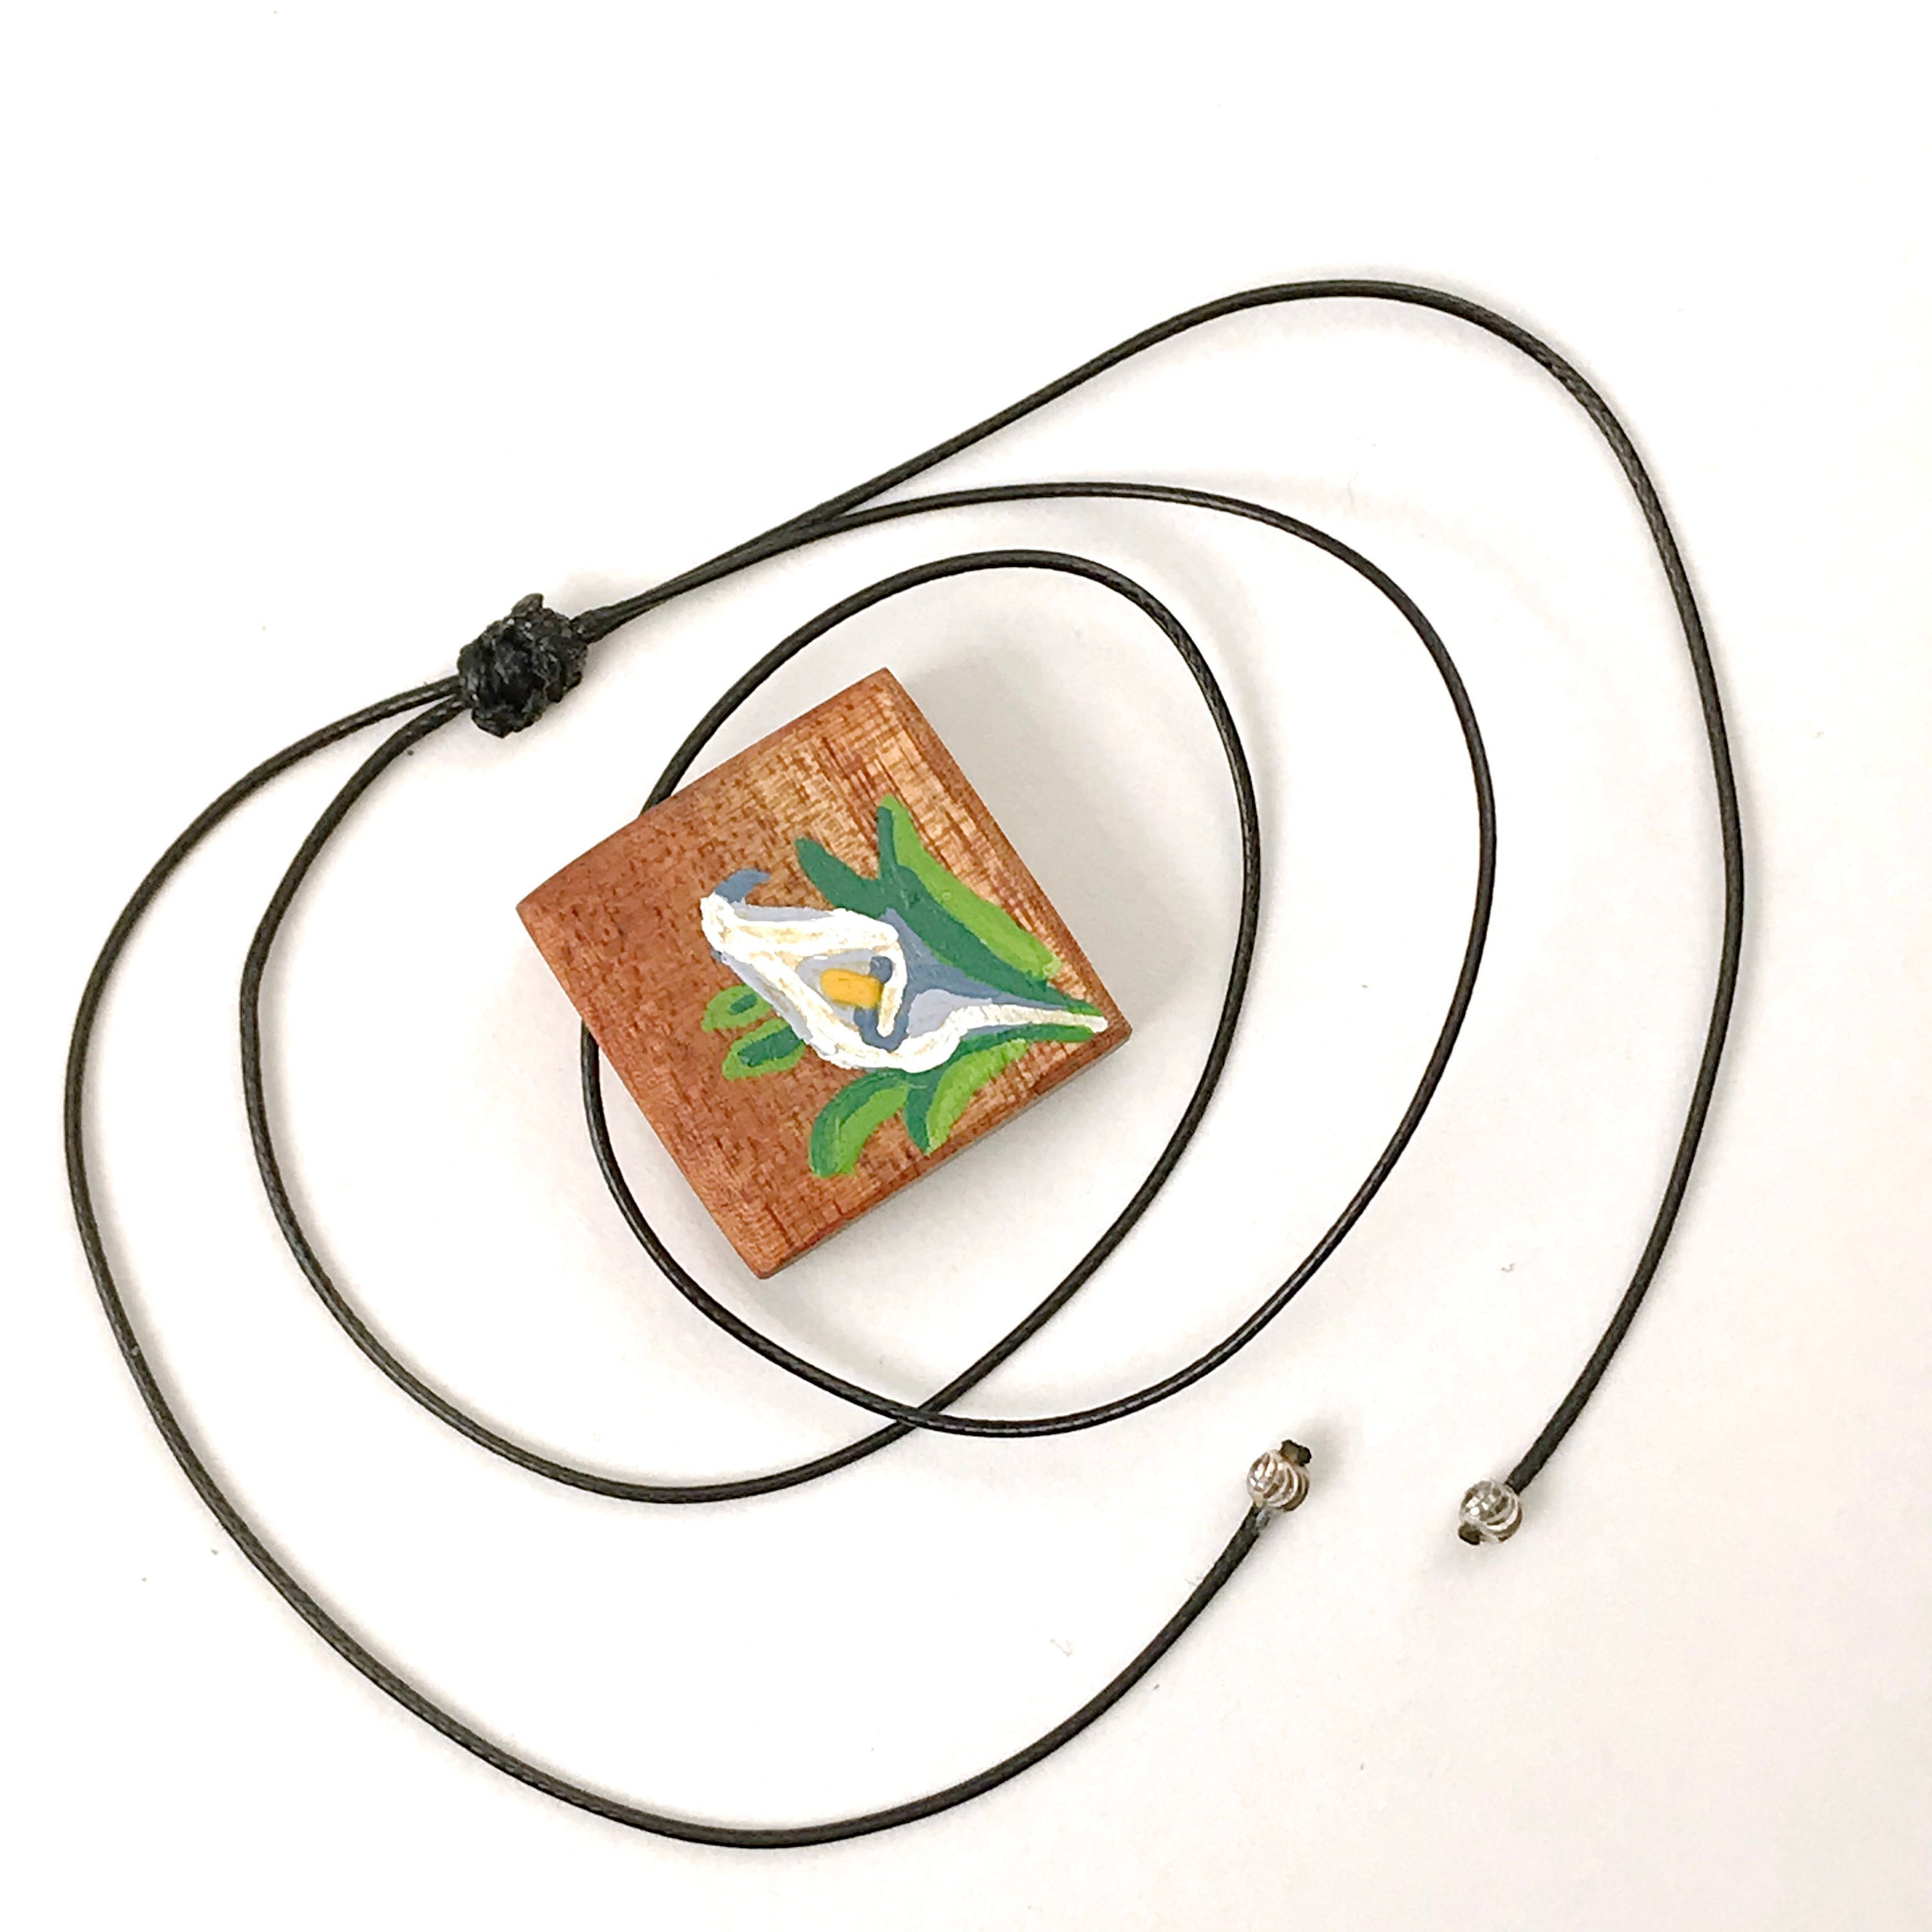 Wooden necklace with small painting original. Fine art quality painting flower pendant on artistic choker or necklace.